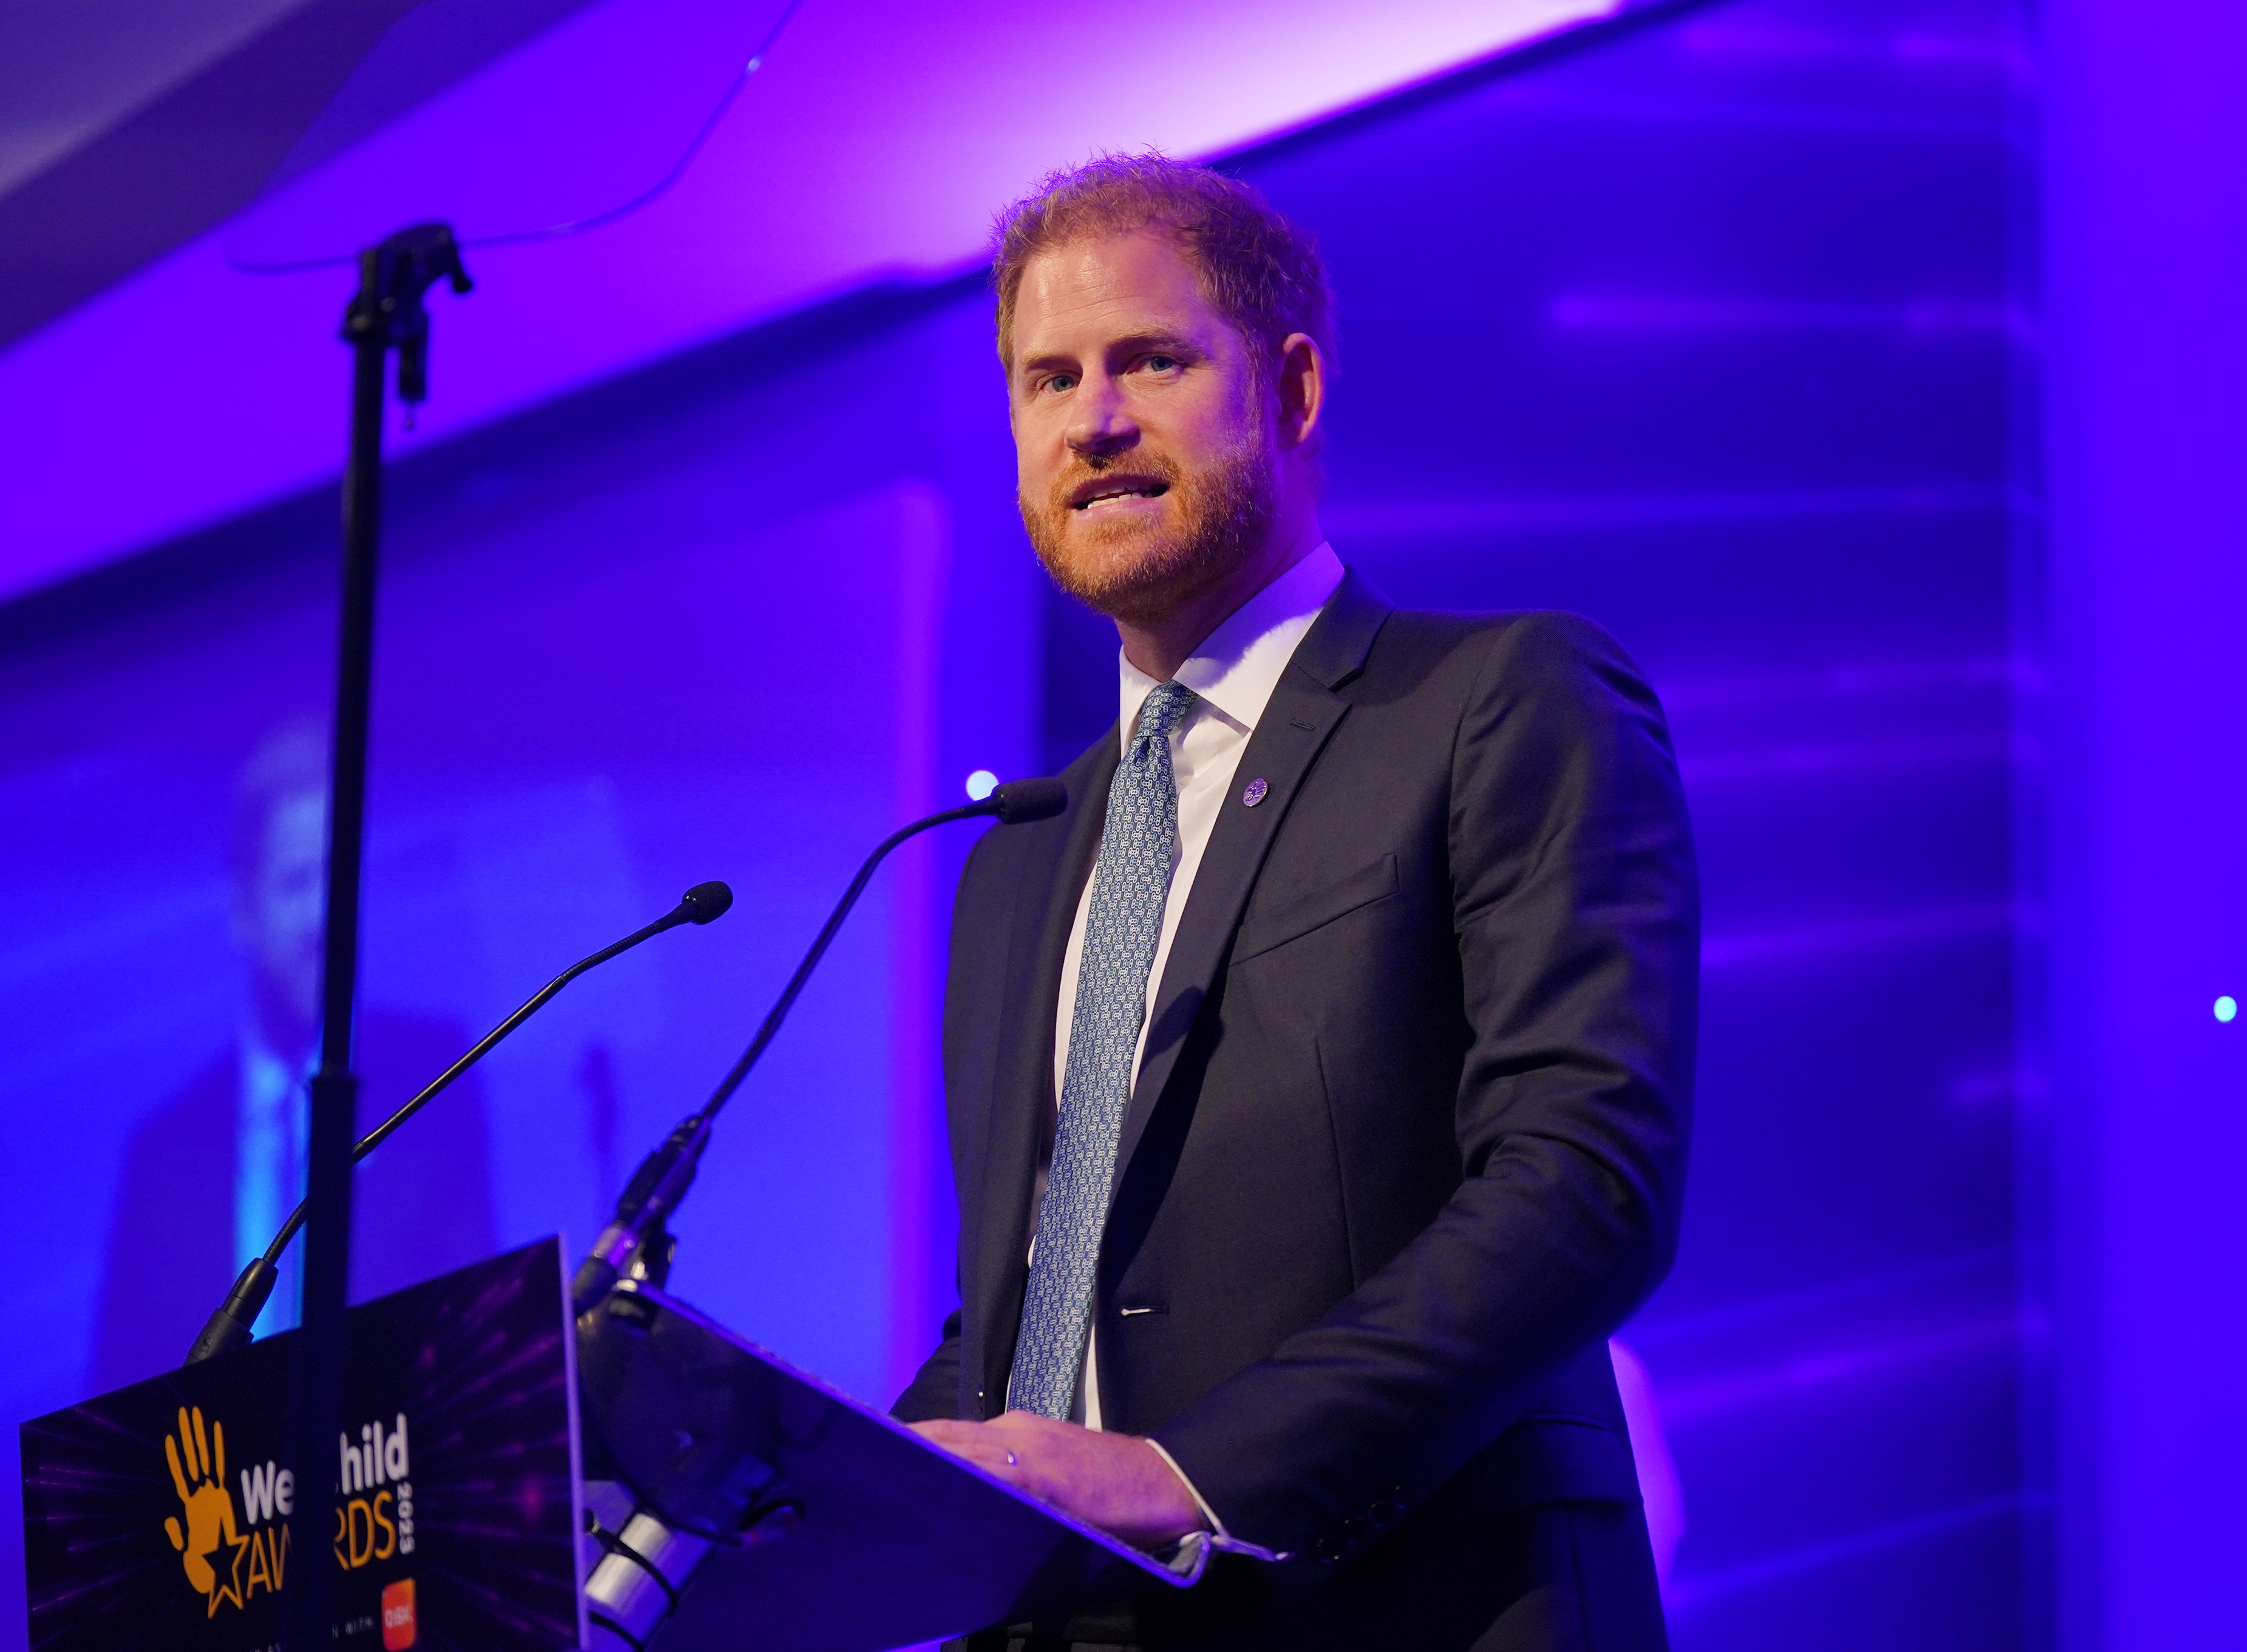 Prince Harry said his grandmother is ‘looking down on all of us’ during his speech